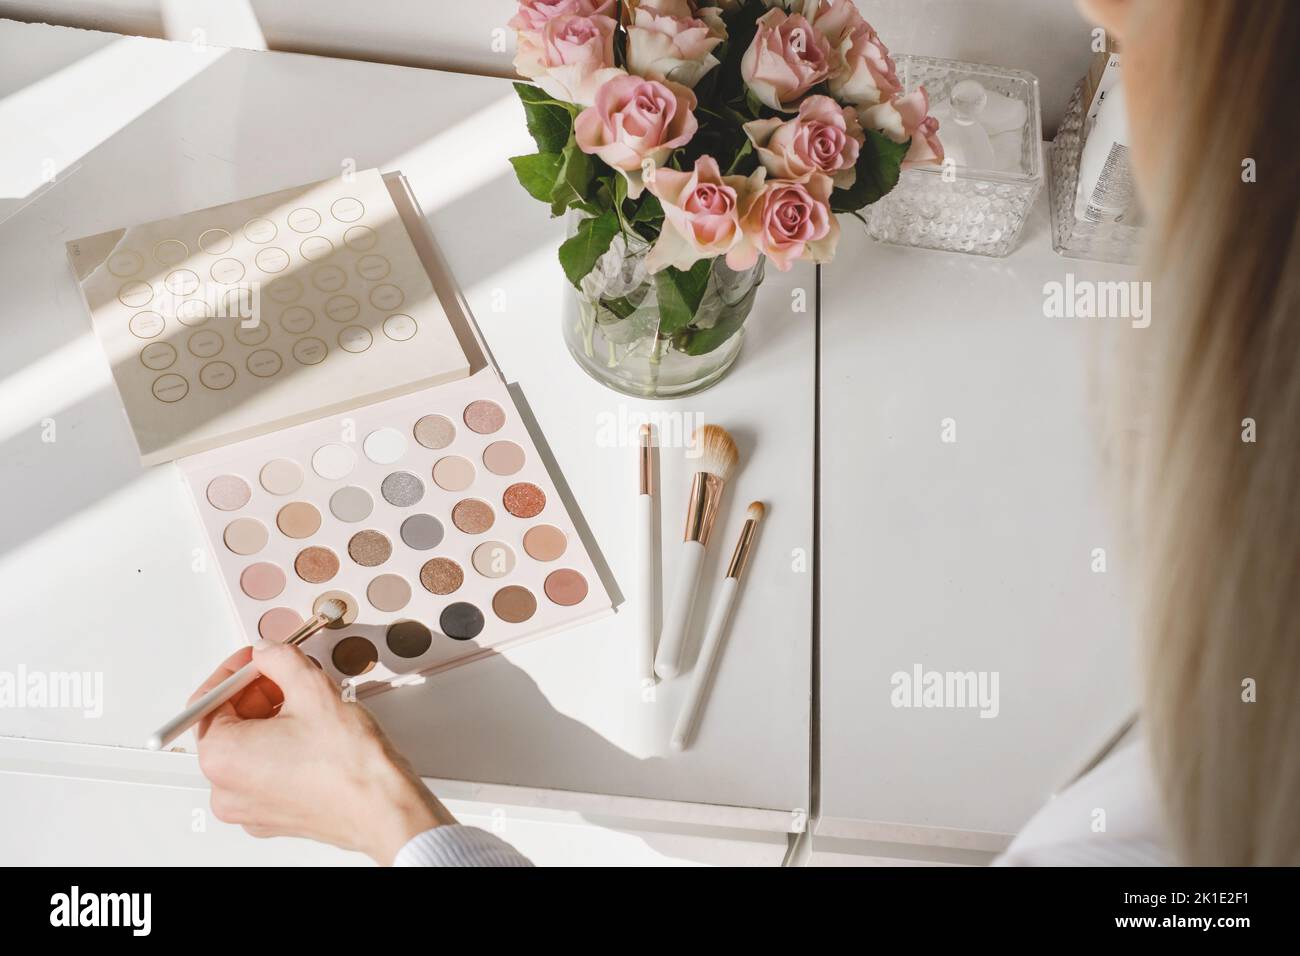 Hand taking cosmetics for make-up, roses flowers on table. Decorative eyes shadows with foundation on dressing table in beauty salon. Artist choosing Stock Photo